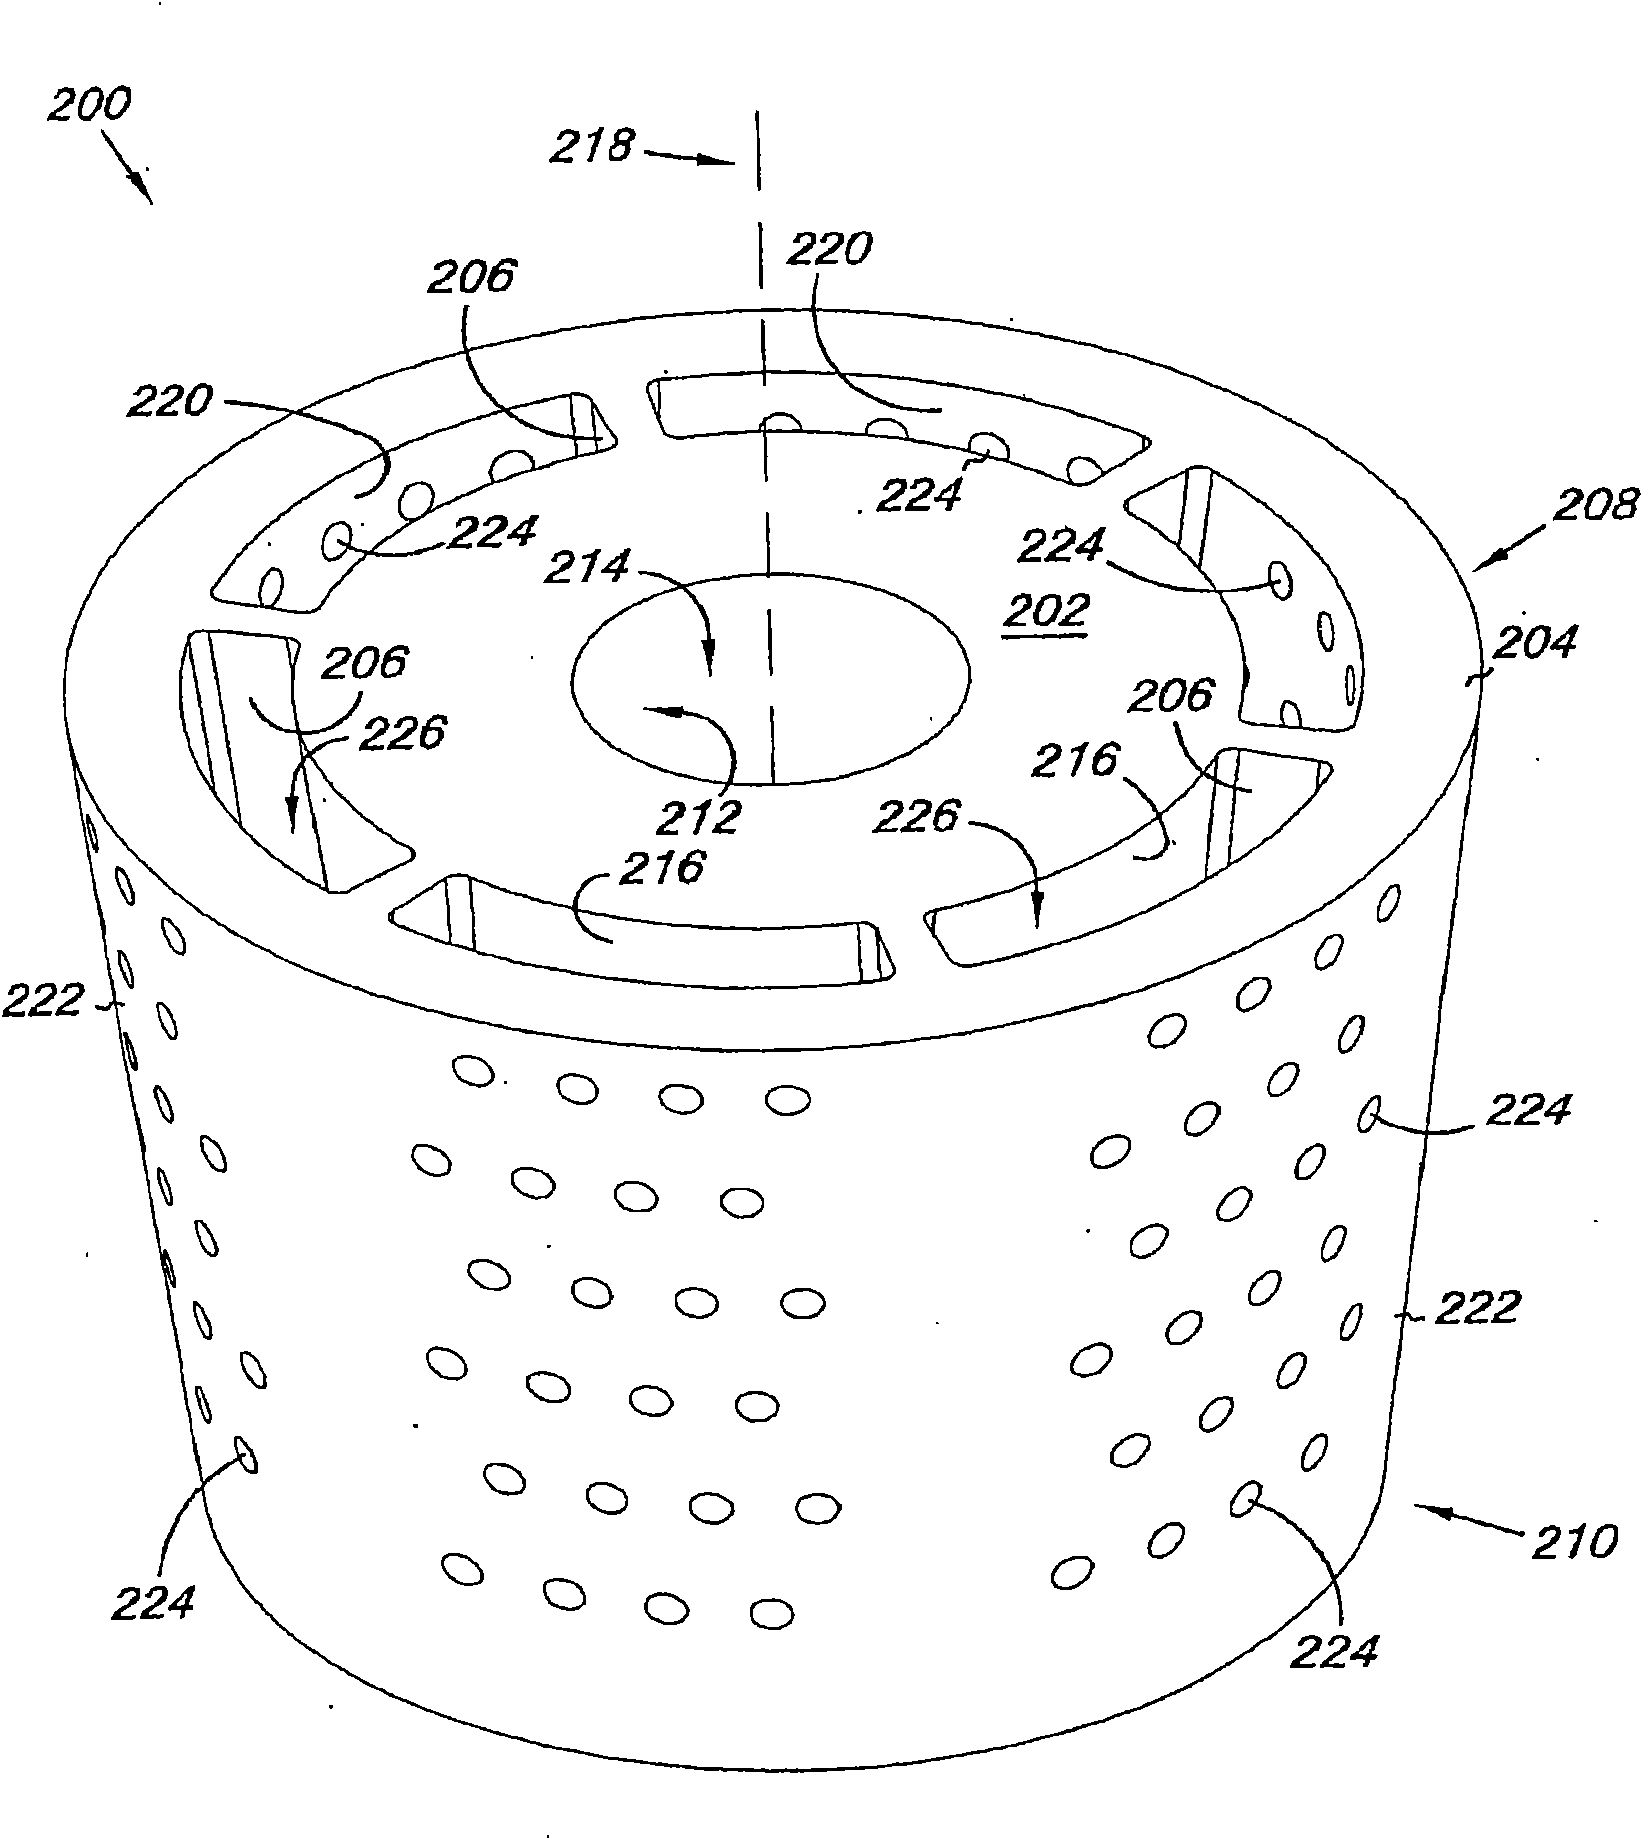 Mixer for a continuous flow reactor, method of forming such a mixer, and method of operating such a reactor